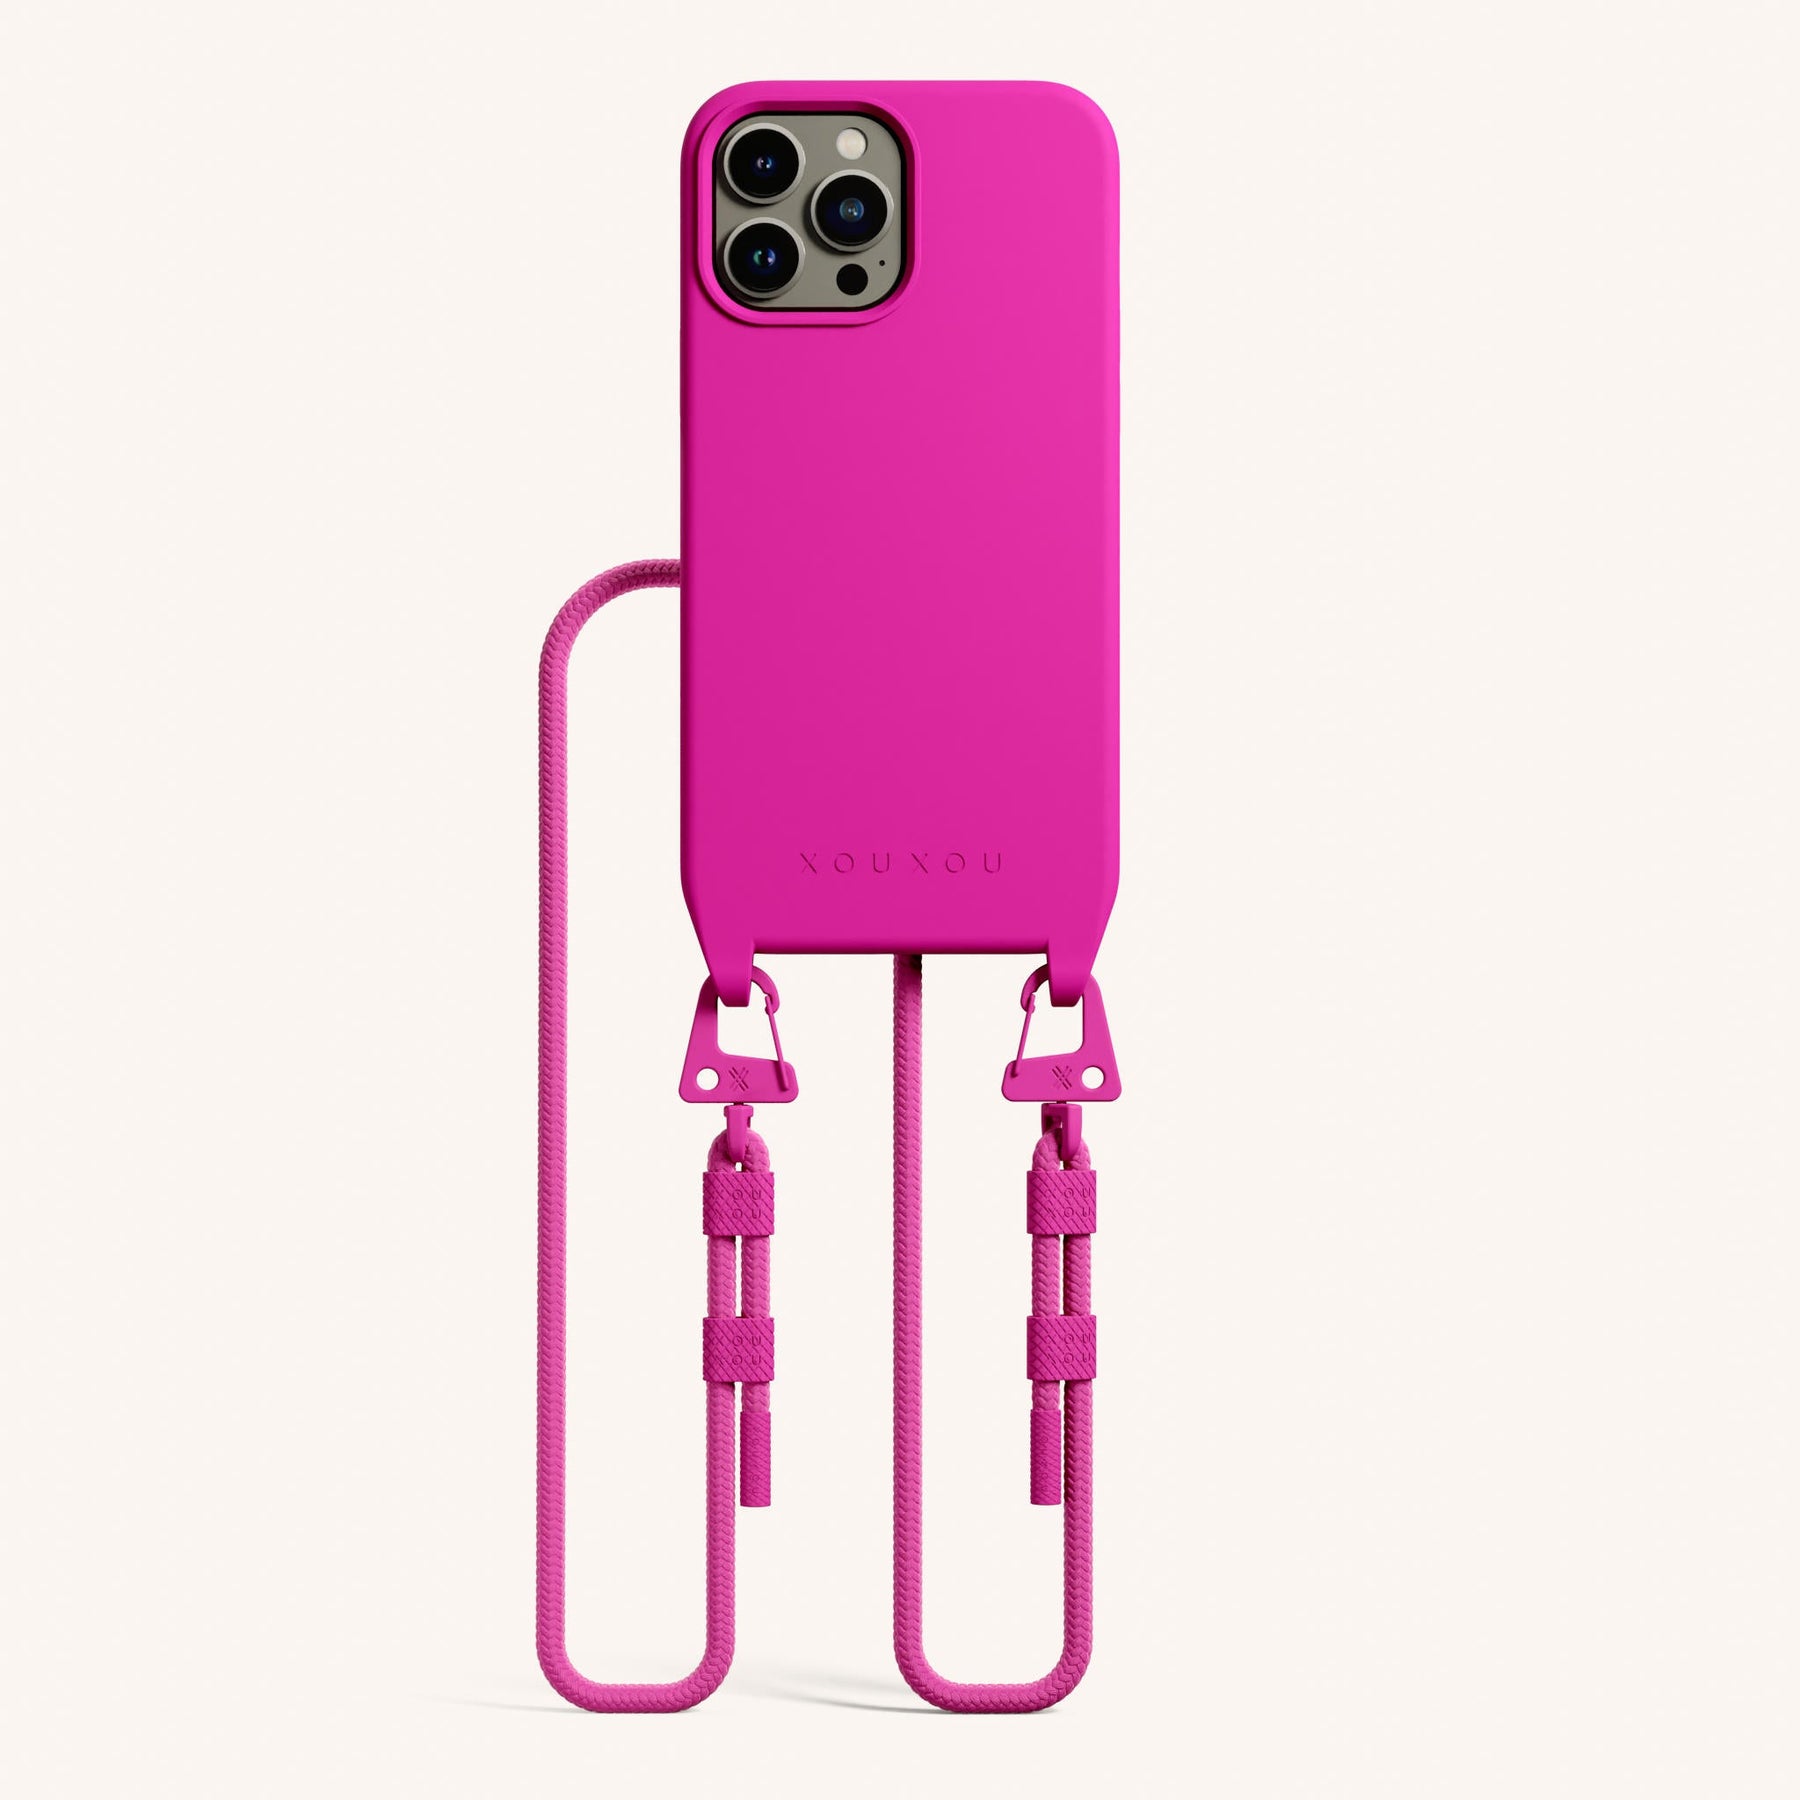 Phone Necklace with Carabiner Rope in Power Pink